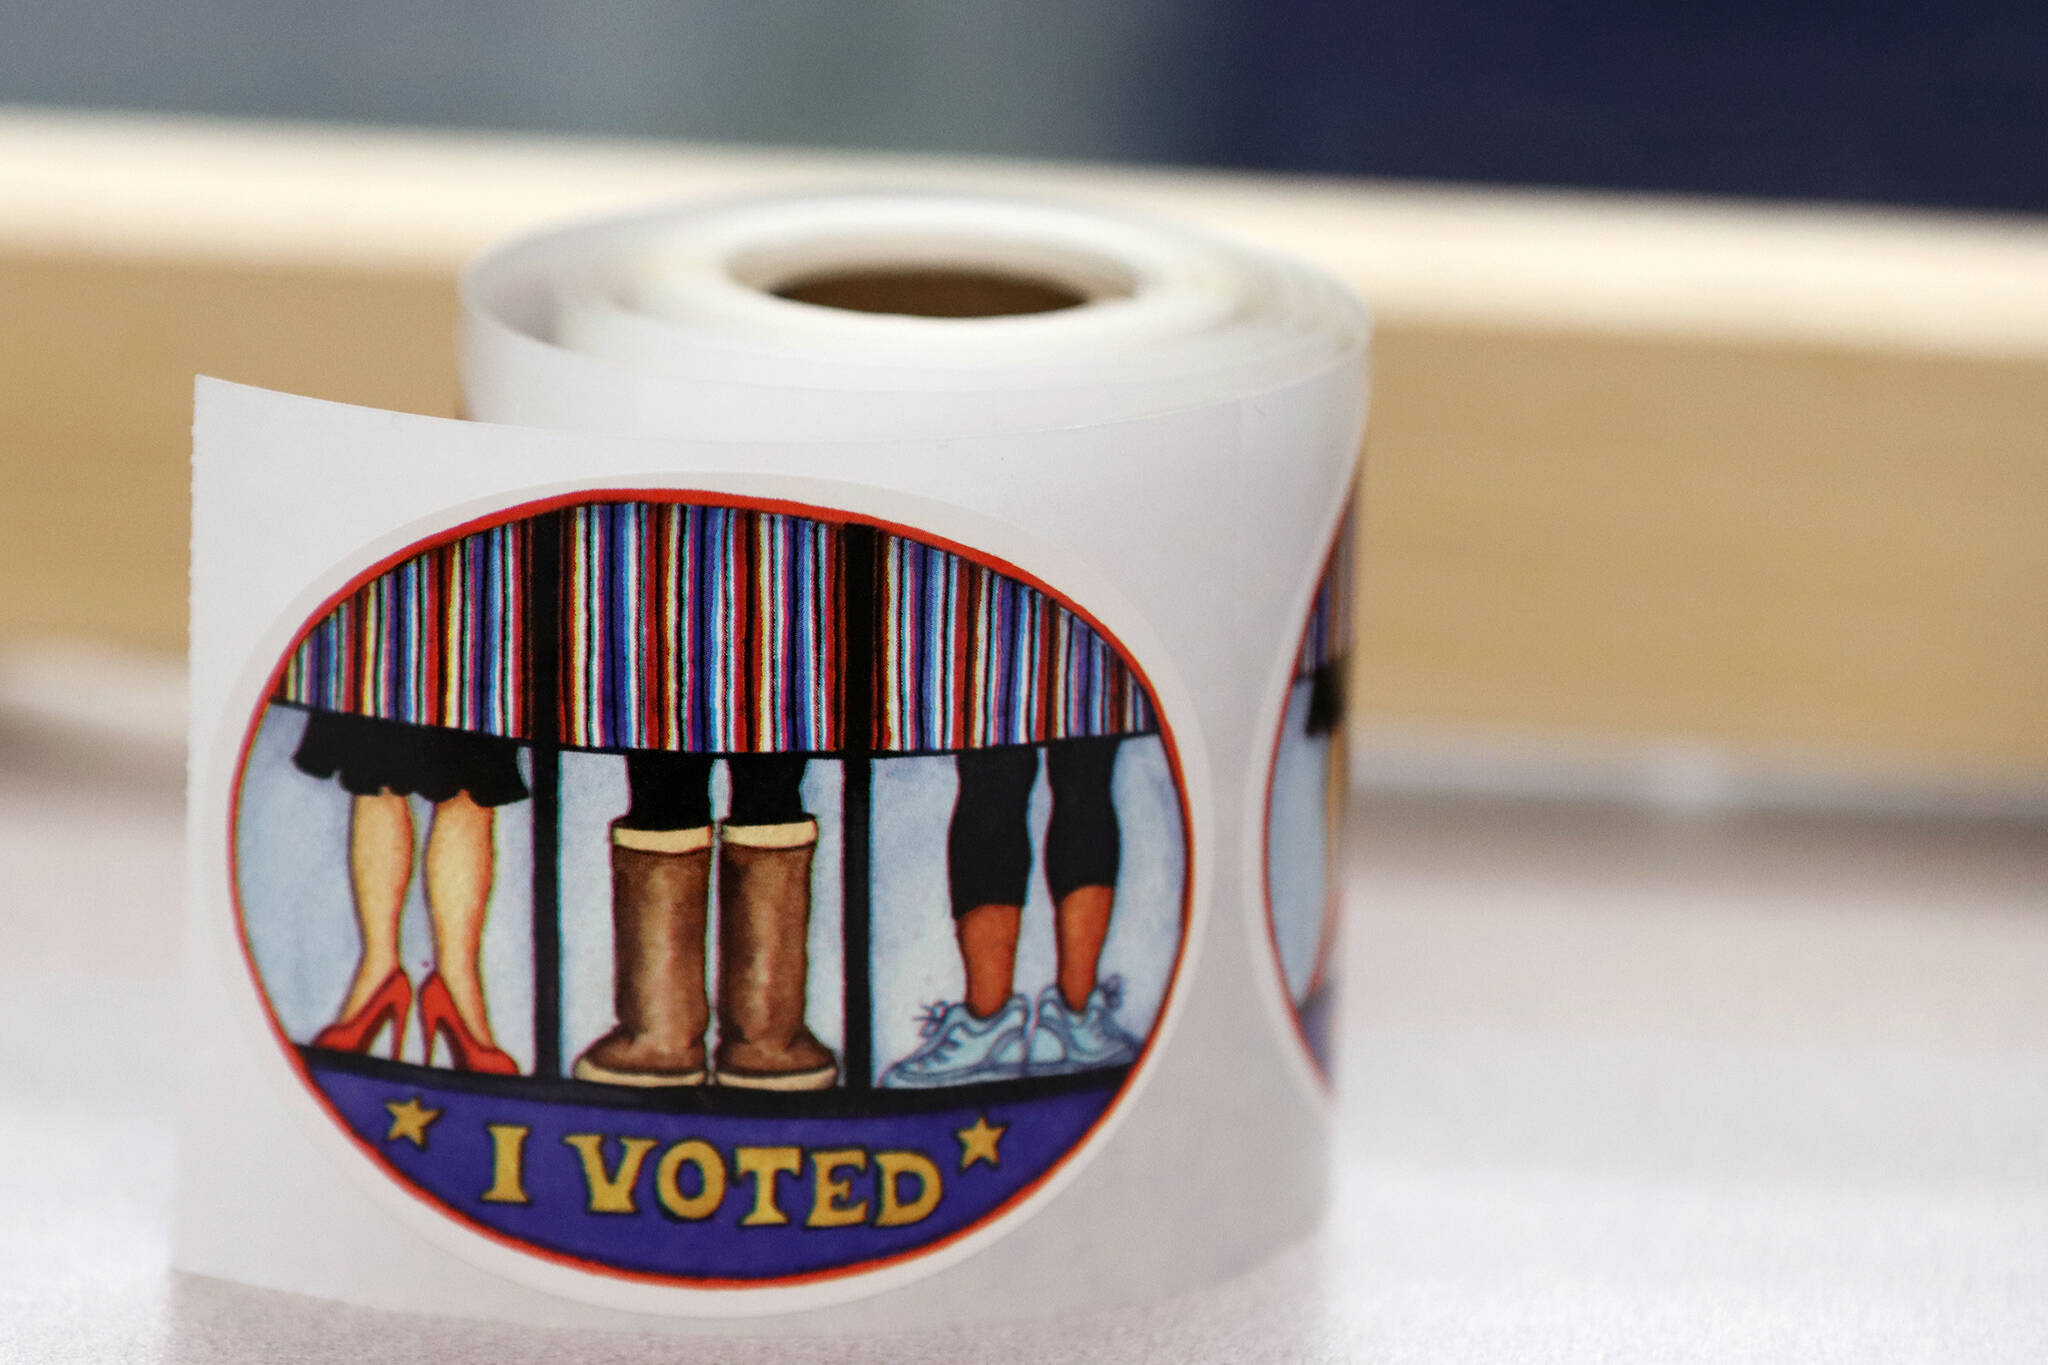 Ben Hohenstatt / Juneau Empire File
A roll of I voted stickers await voters on Saturday at the Alaska Division of Elections office in Juneau.